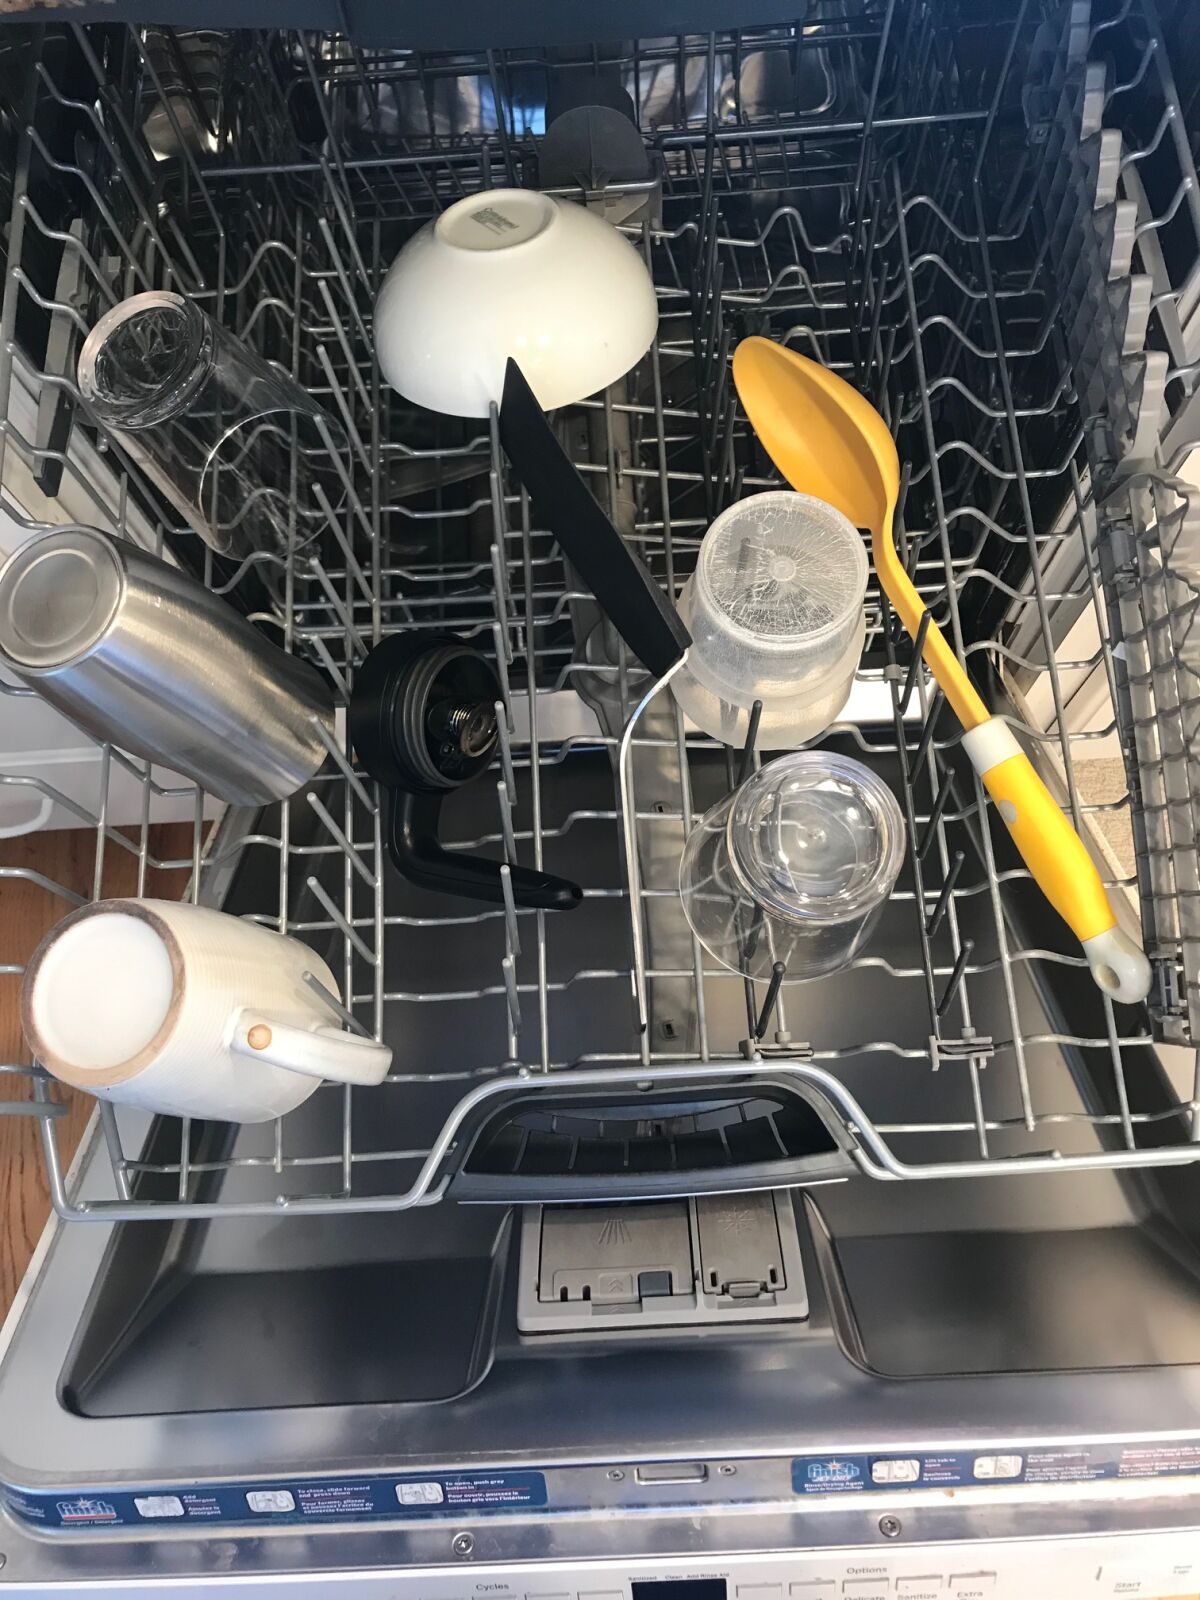 Inga says she could get three more days of dishes into this dishwasher before running it.